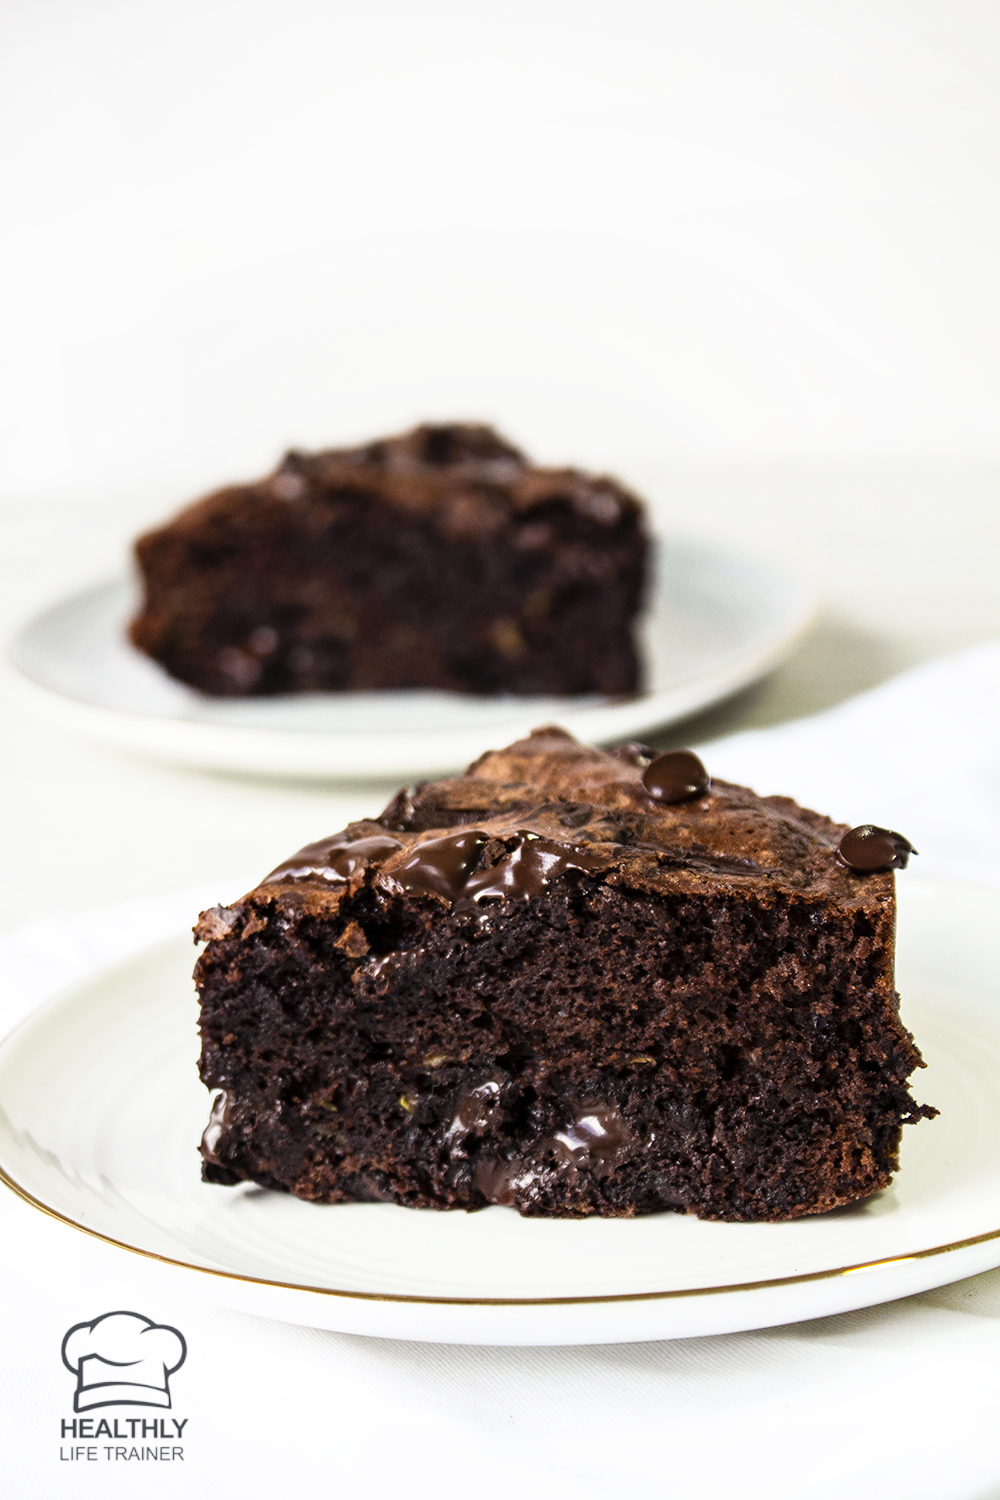 A rich and healthy chocolate zucchini cake topped with dark chocolate to self indulge after a rough day. 